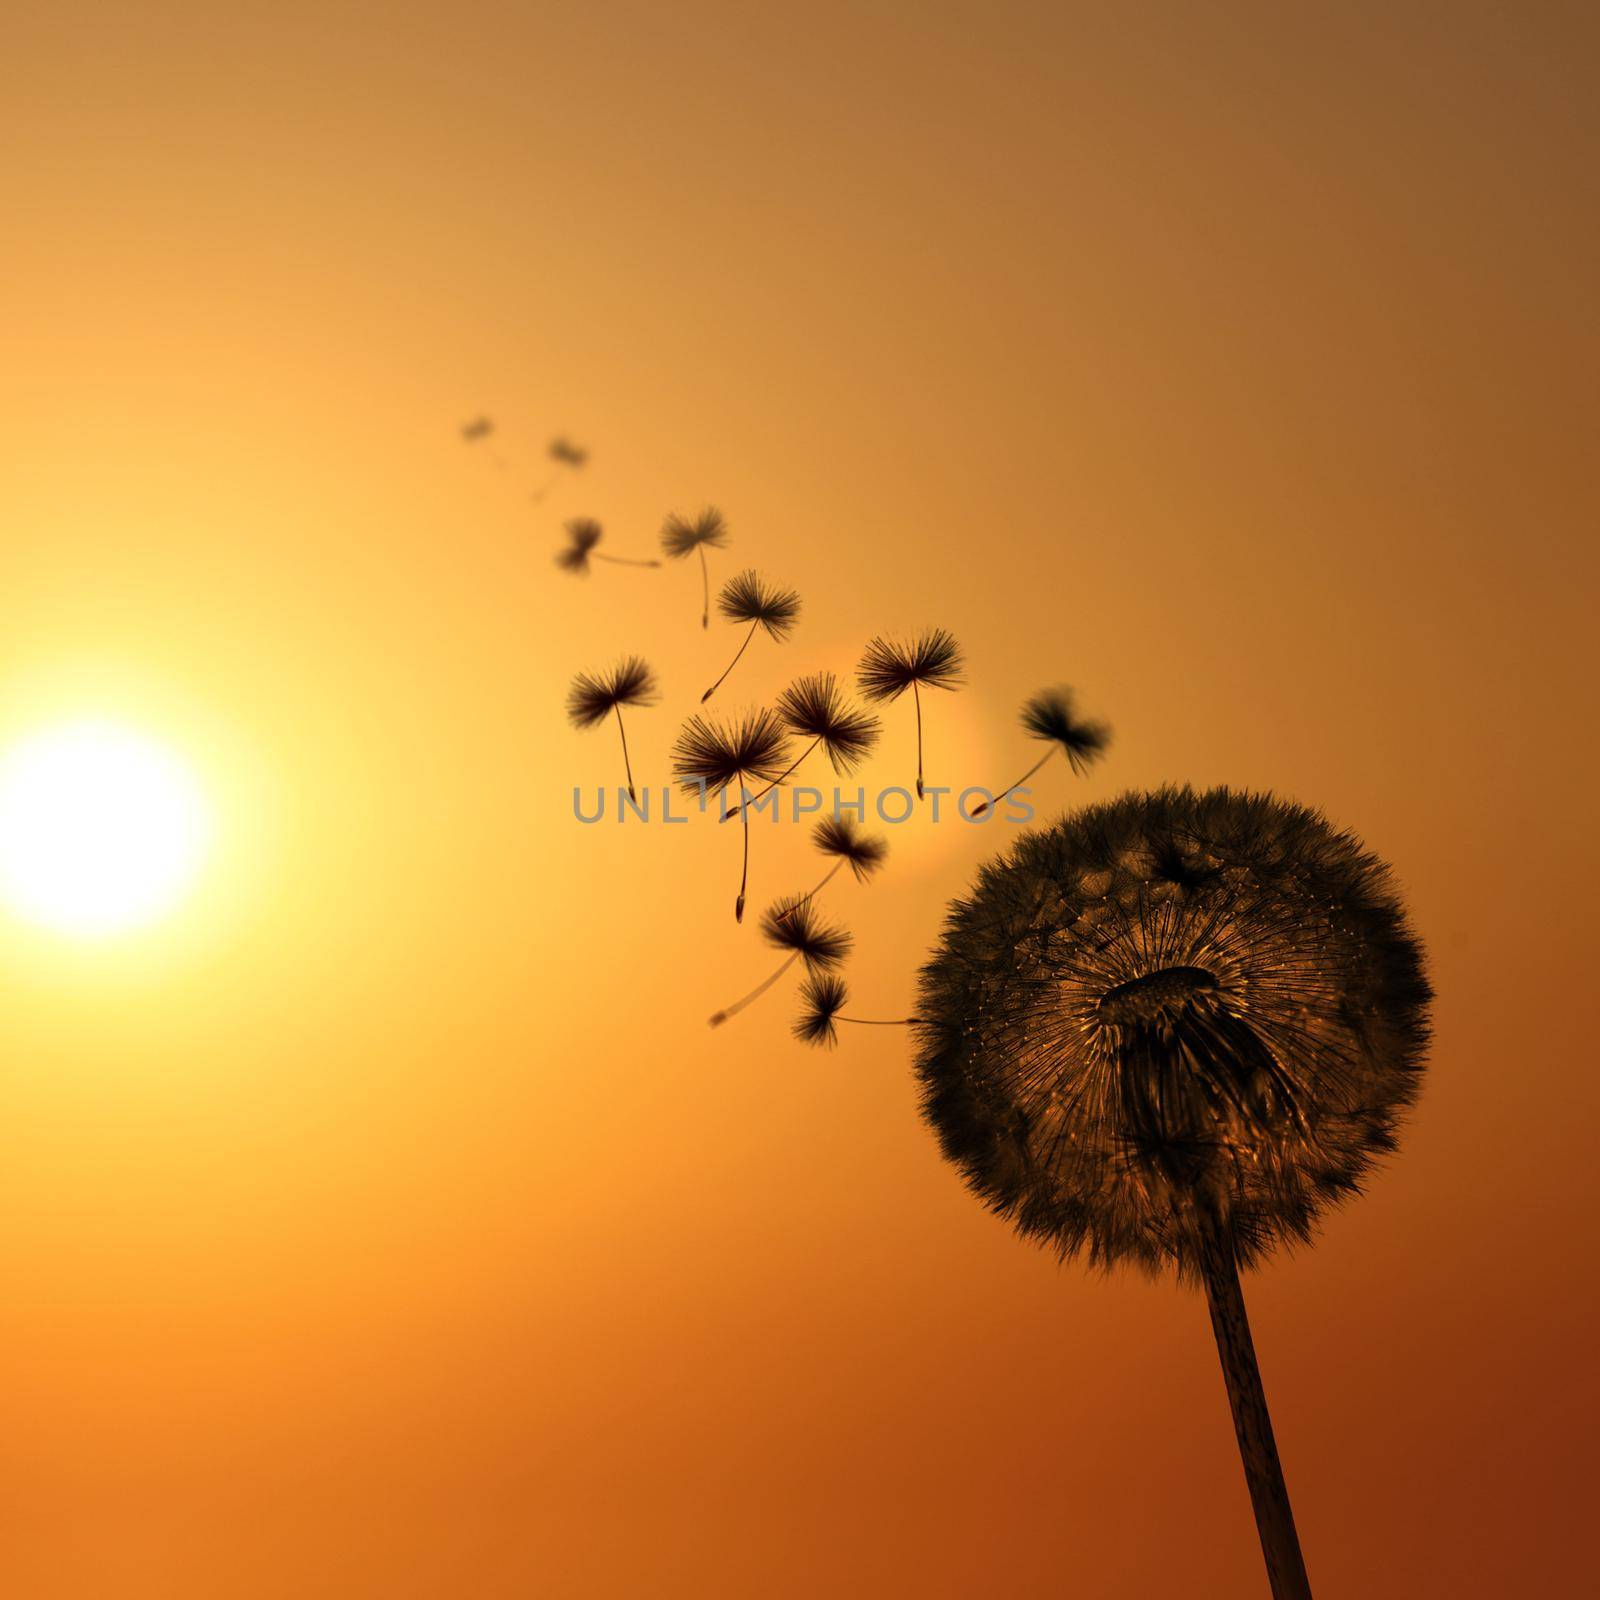 Dandelion flower with flying feathers on sunset. by Taut